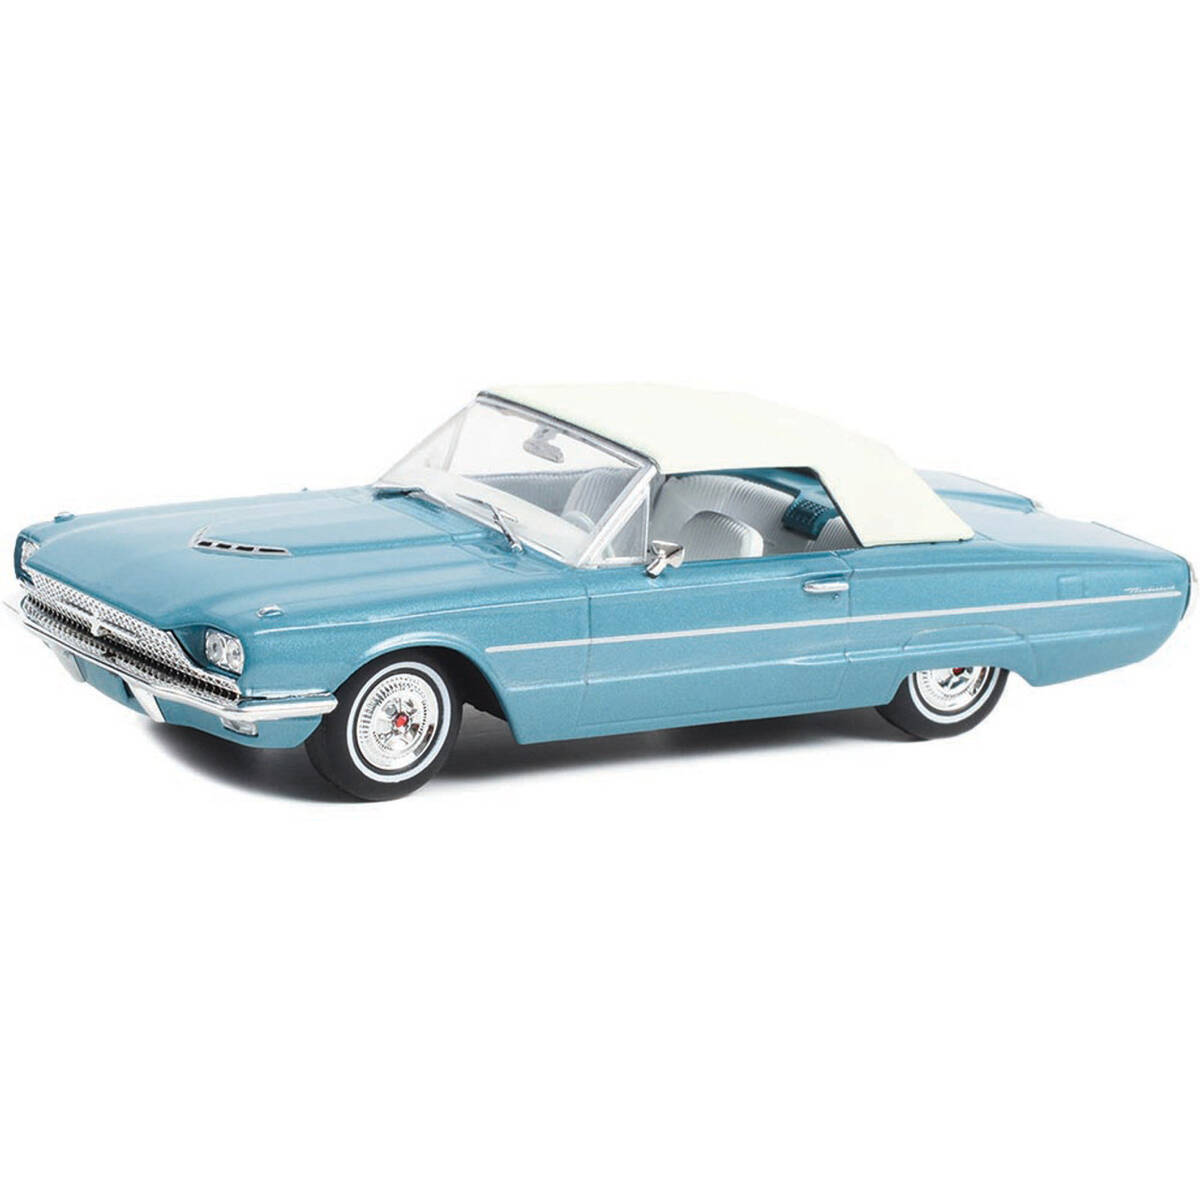 Greenlight 1:43 Thelma & Louise (1991) - 1966 Ford Thunderbird Convertible (Top-Up) 86619